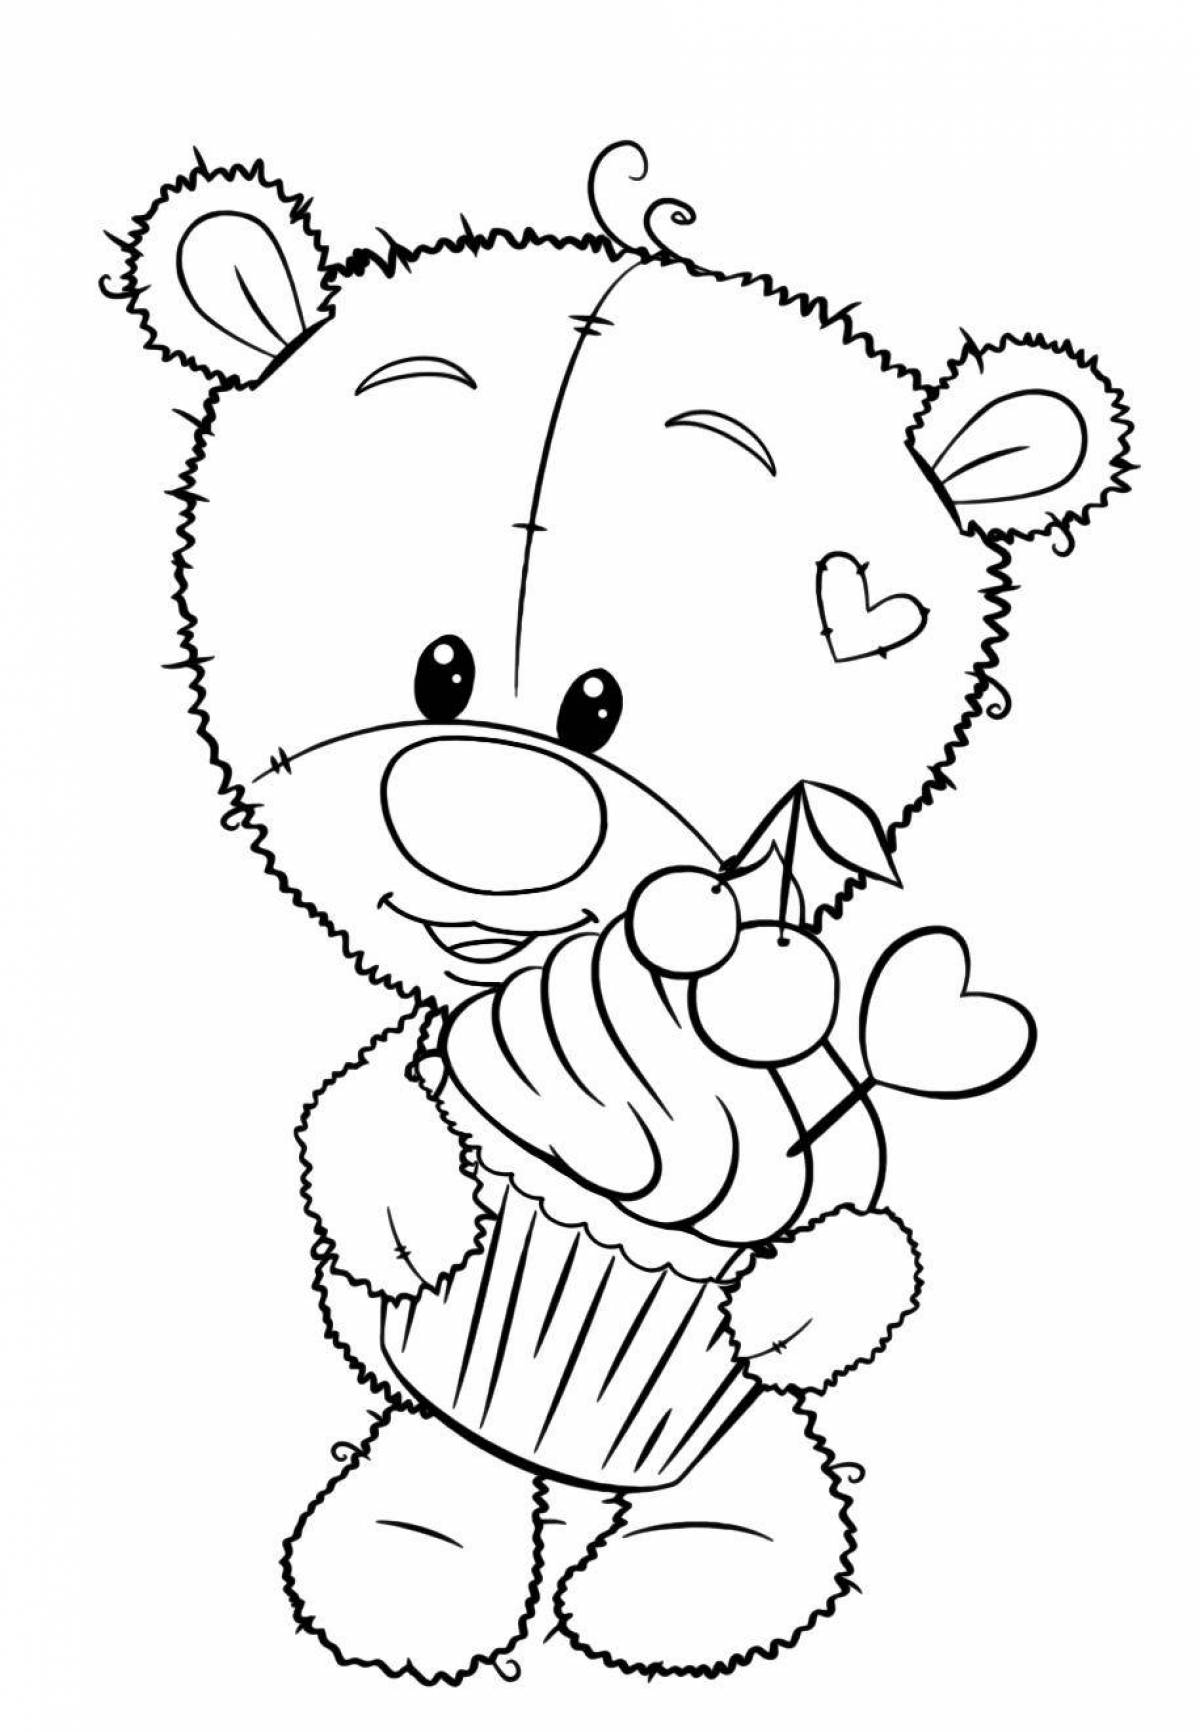 Coloring teddy bear with a bow